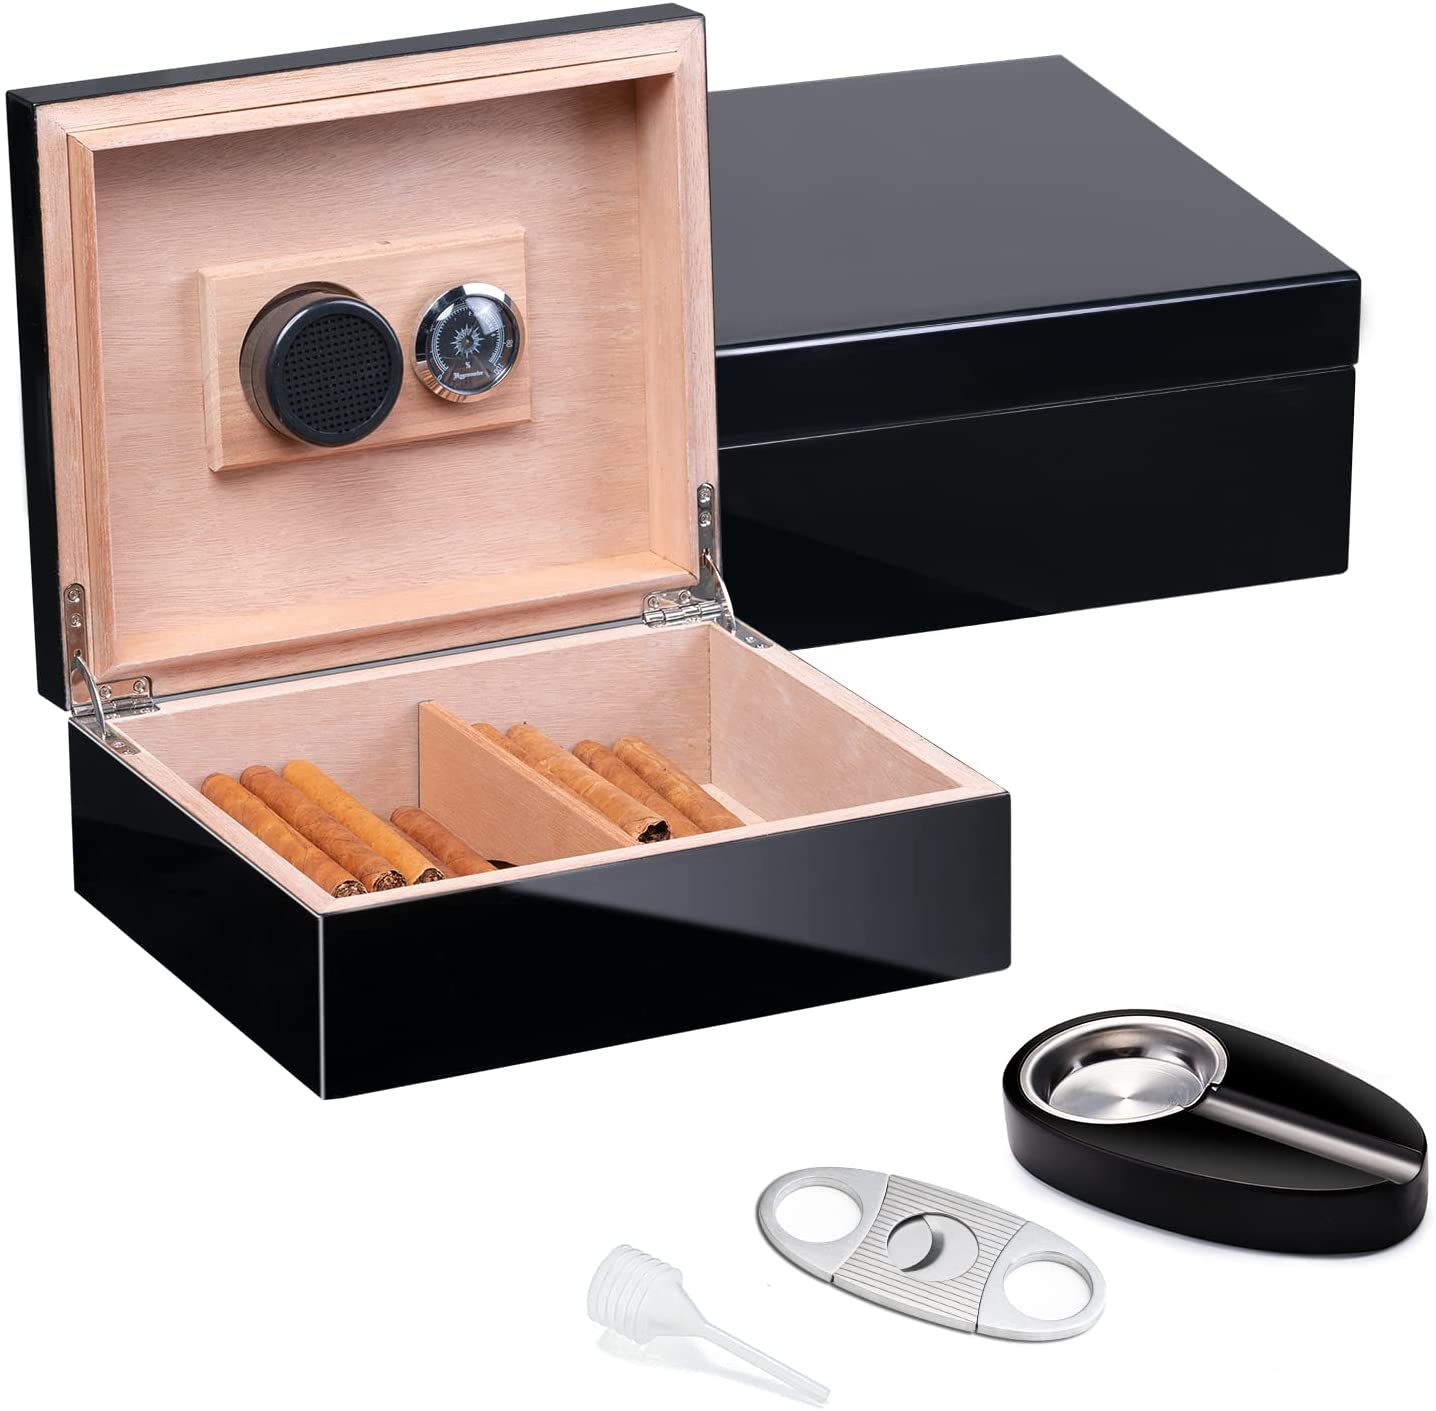 Fullrich Factory Wholesale Handmade Cigar Humidor Box with Hygrometer Humidifier Cutter and Ashtray for 30-50 Counts, Polished Piano Black Cigar Beginner Kit with Spanish Cedar Lining and Divider